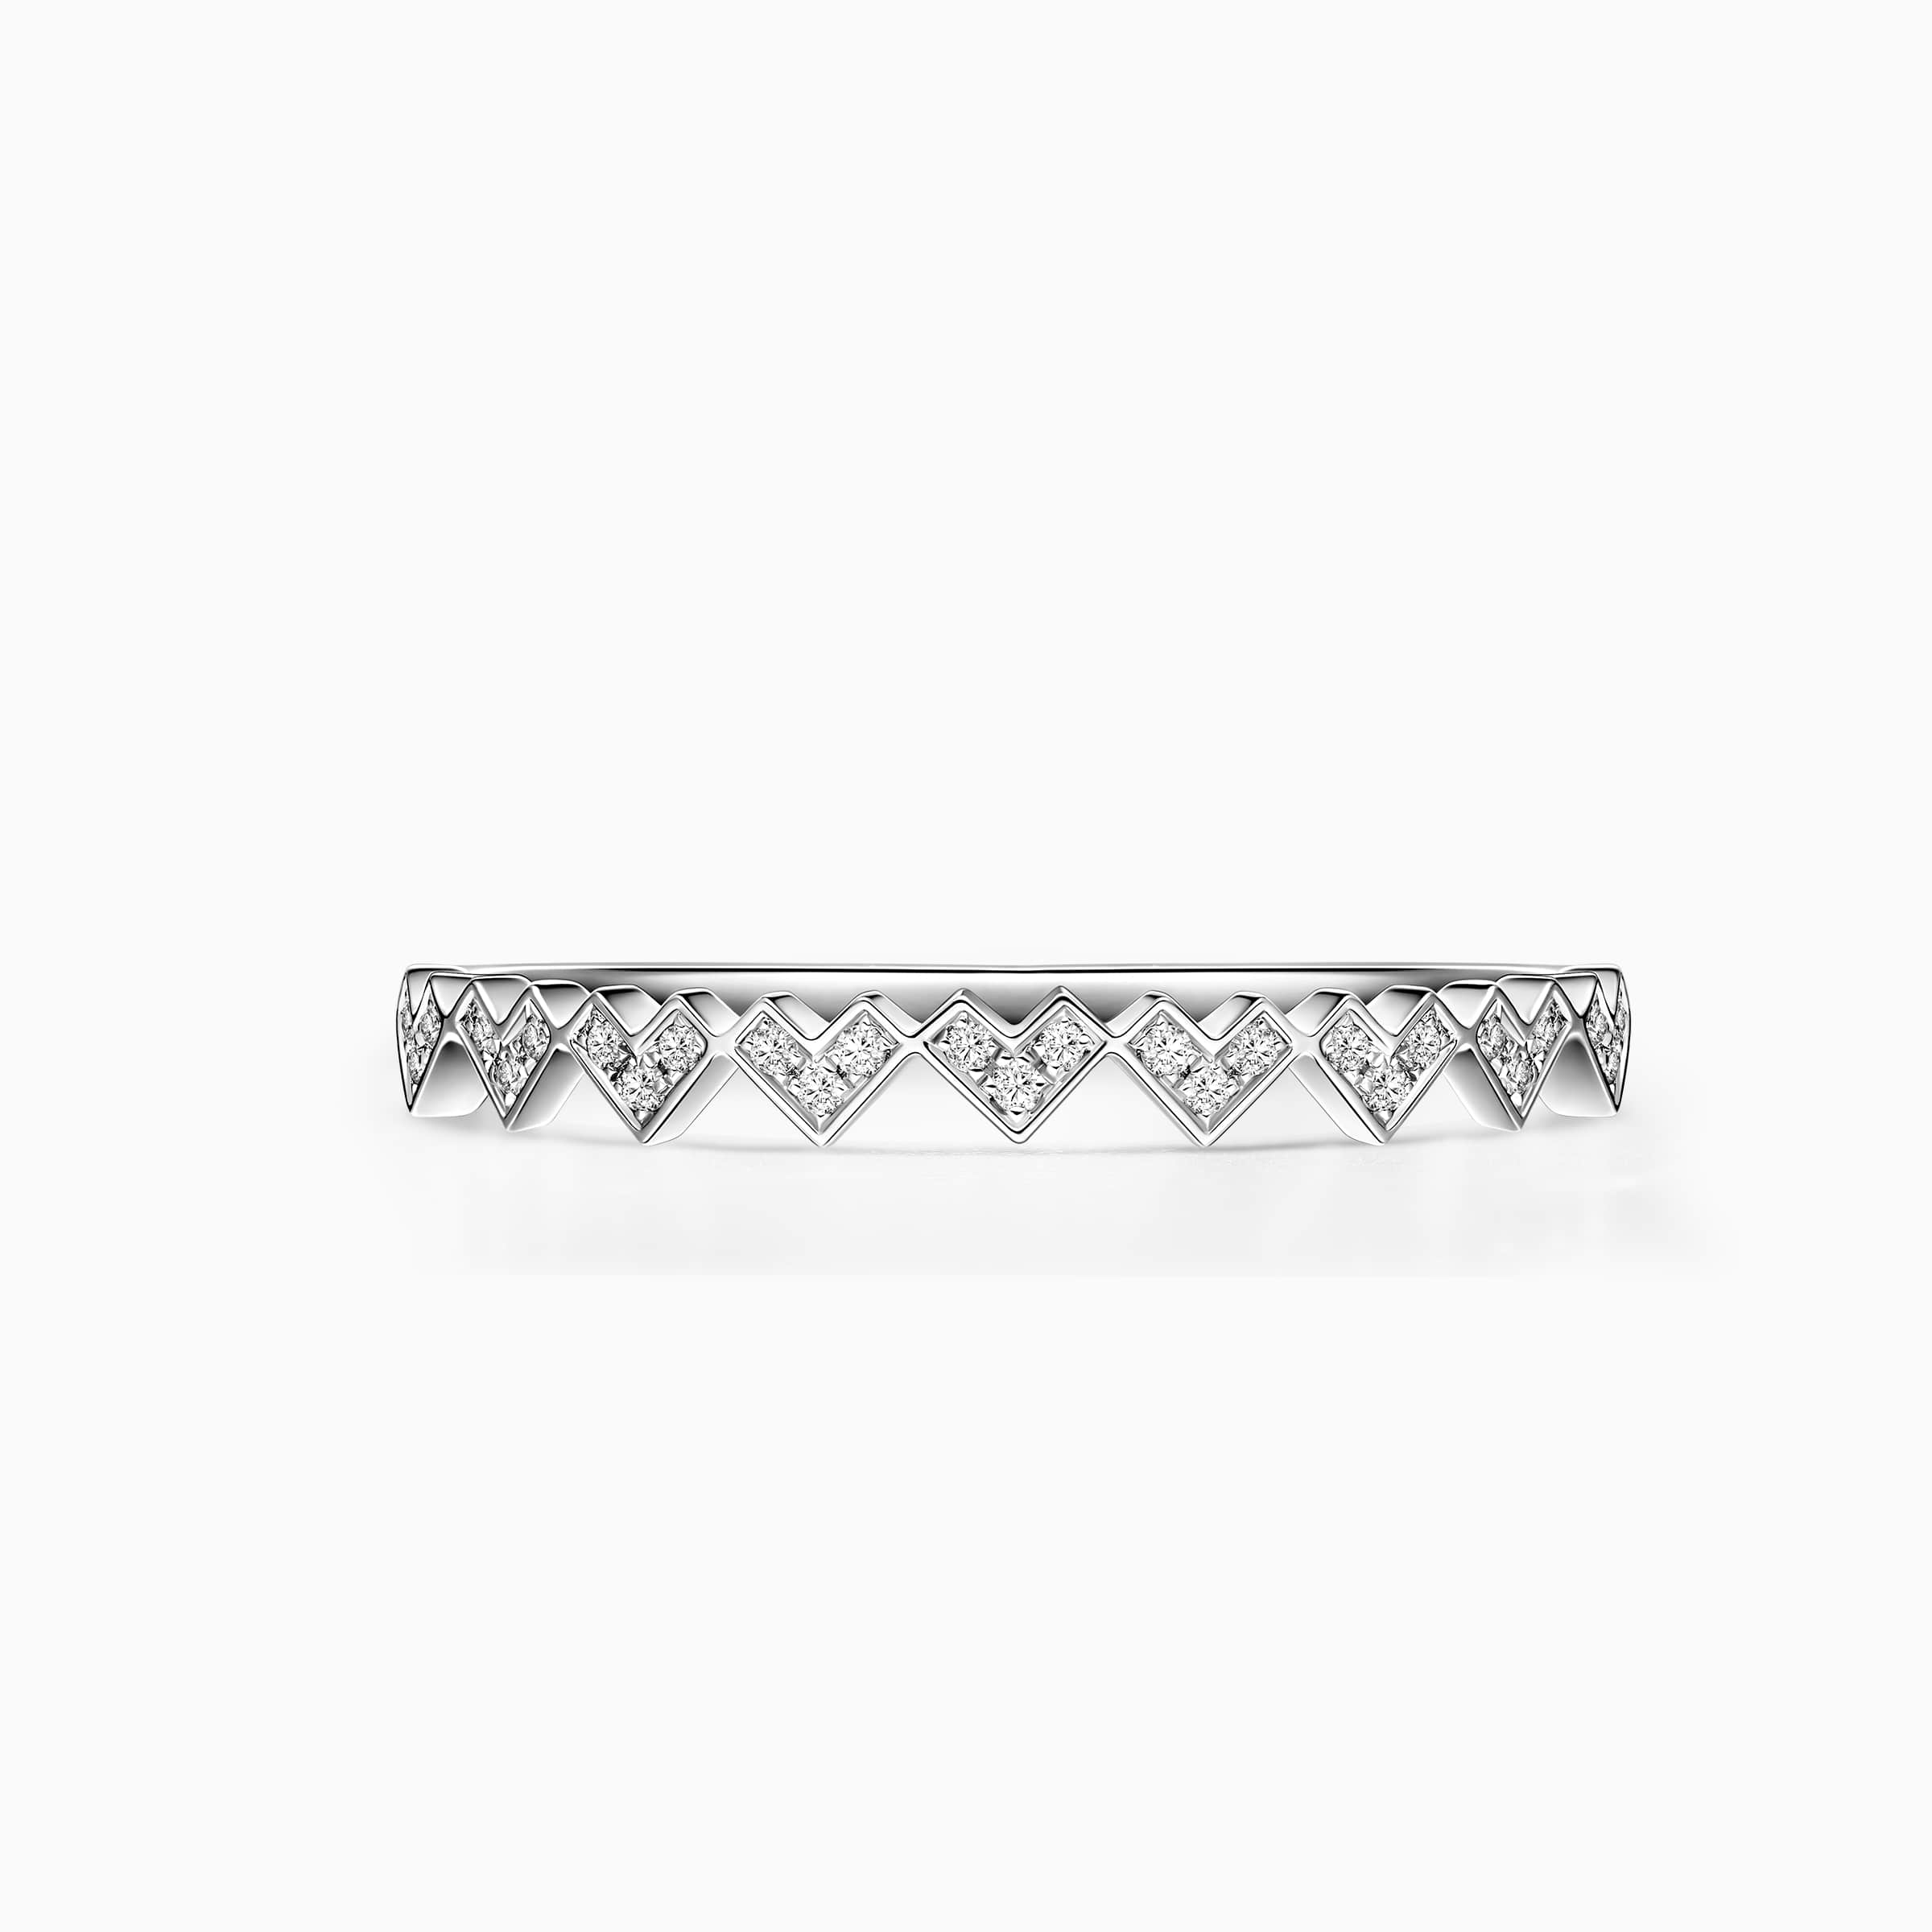 Darry Ring heart shaped diamond wedding ring in white gold